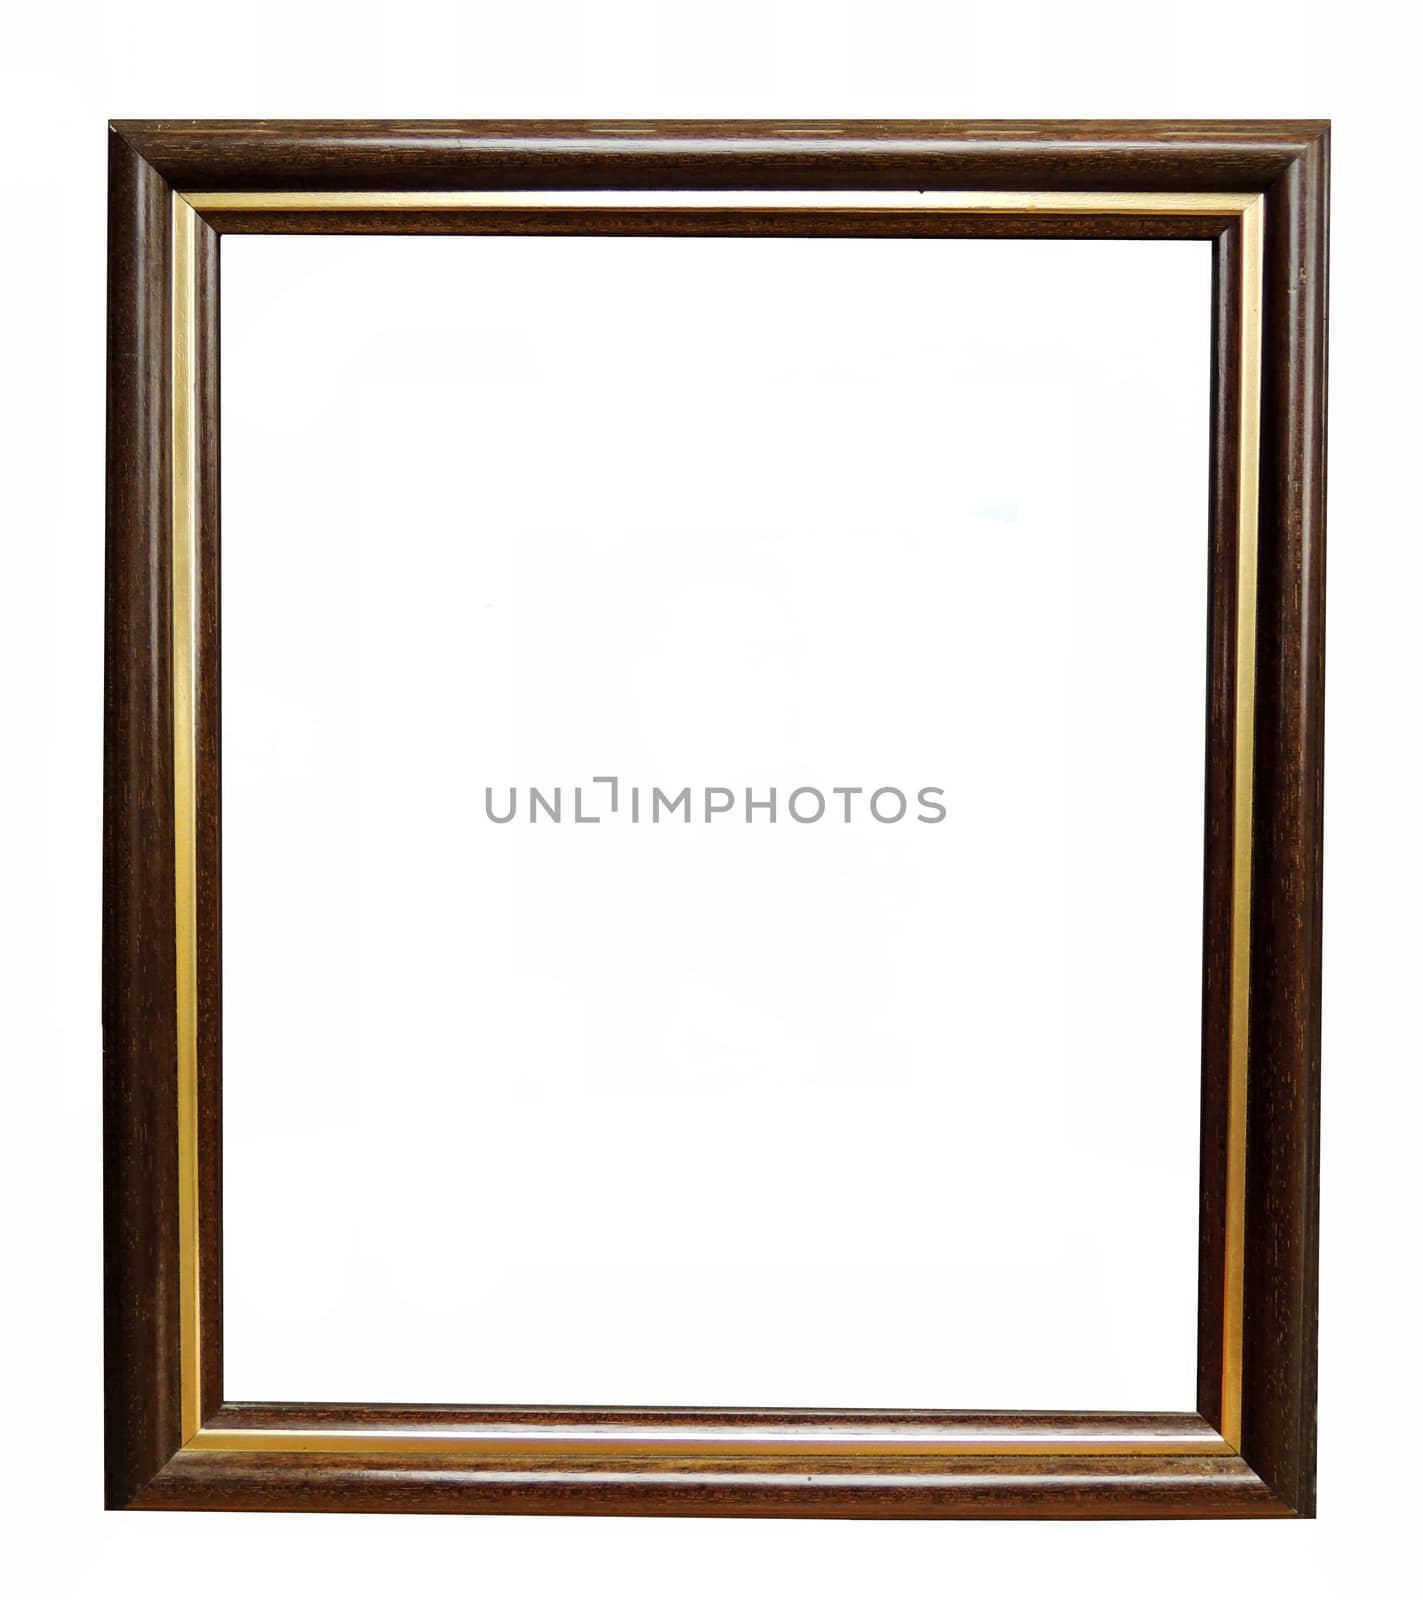 Wooden - golg  frame: wood and canvas, italian style, isolated o by MalyDesigner